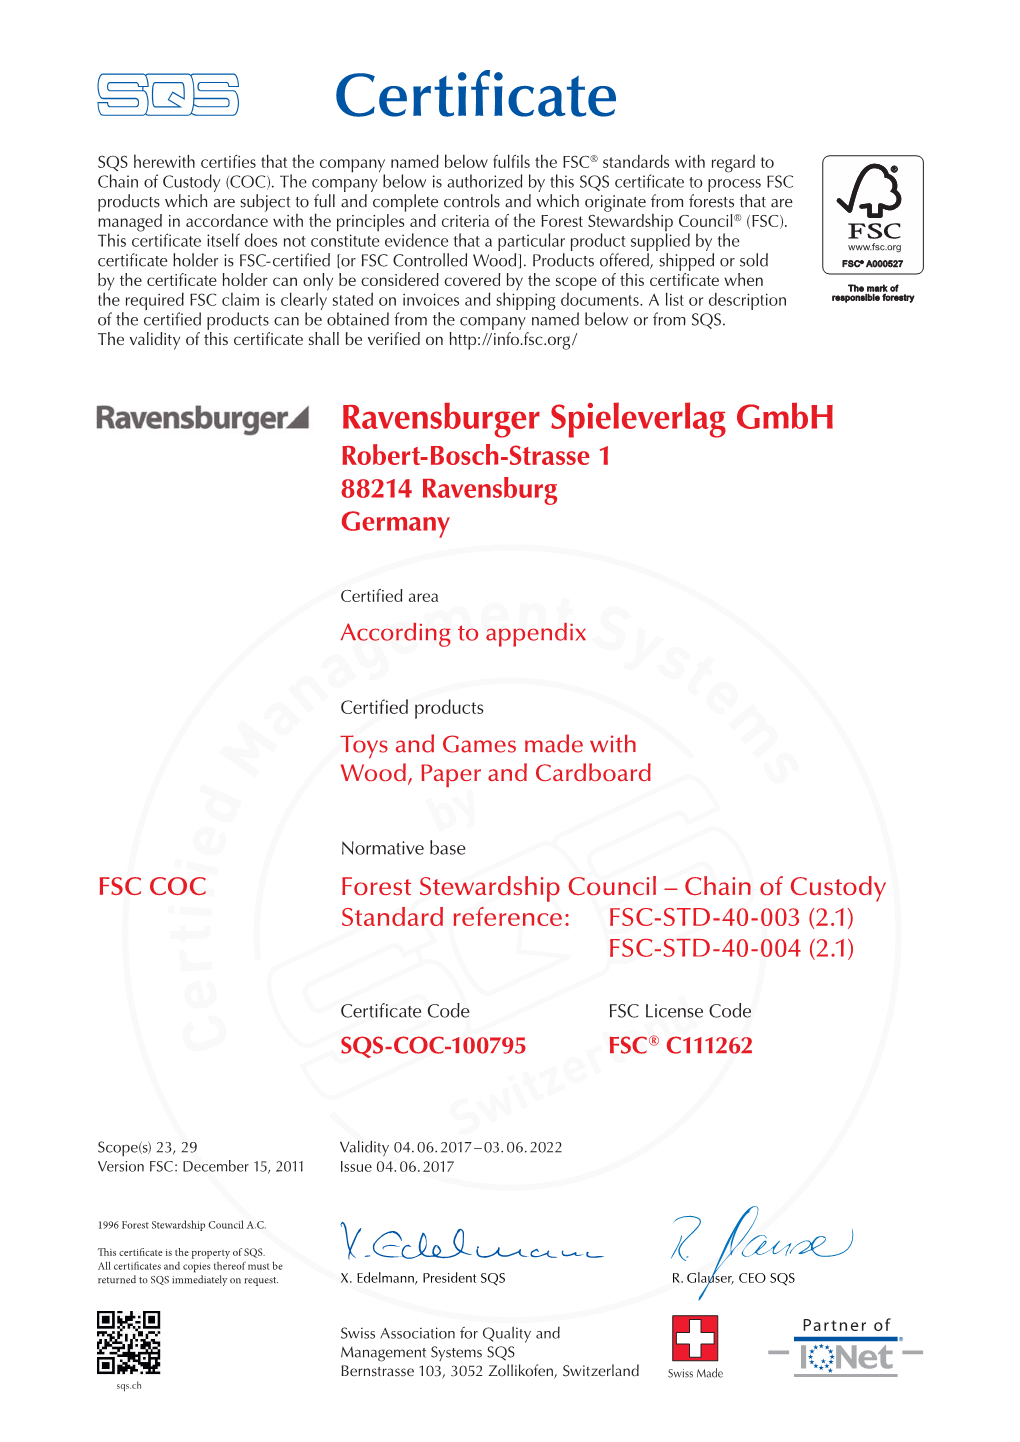 FSC® Standards with Regard to Chain of Custody (COC)